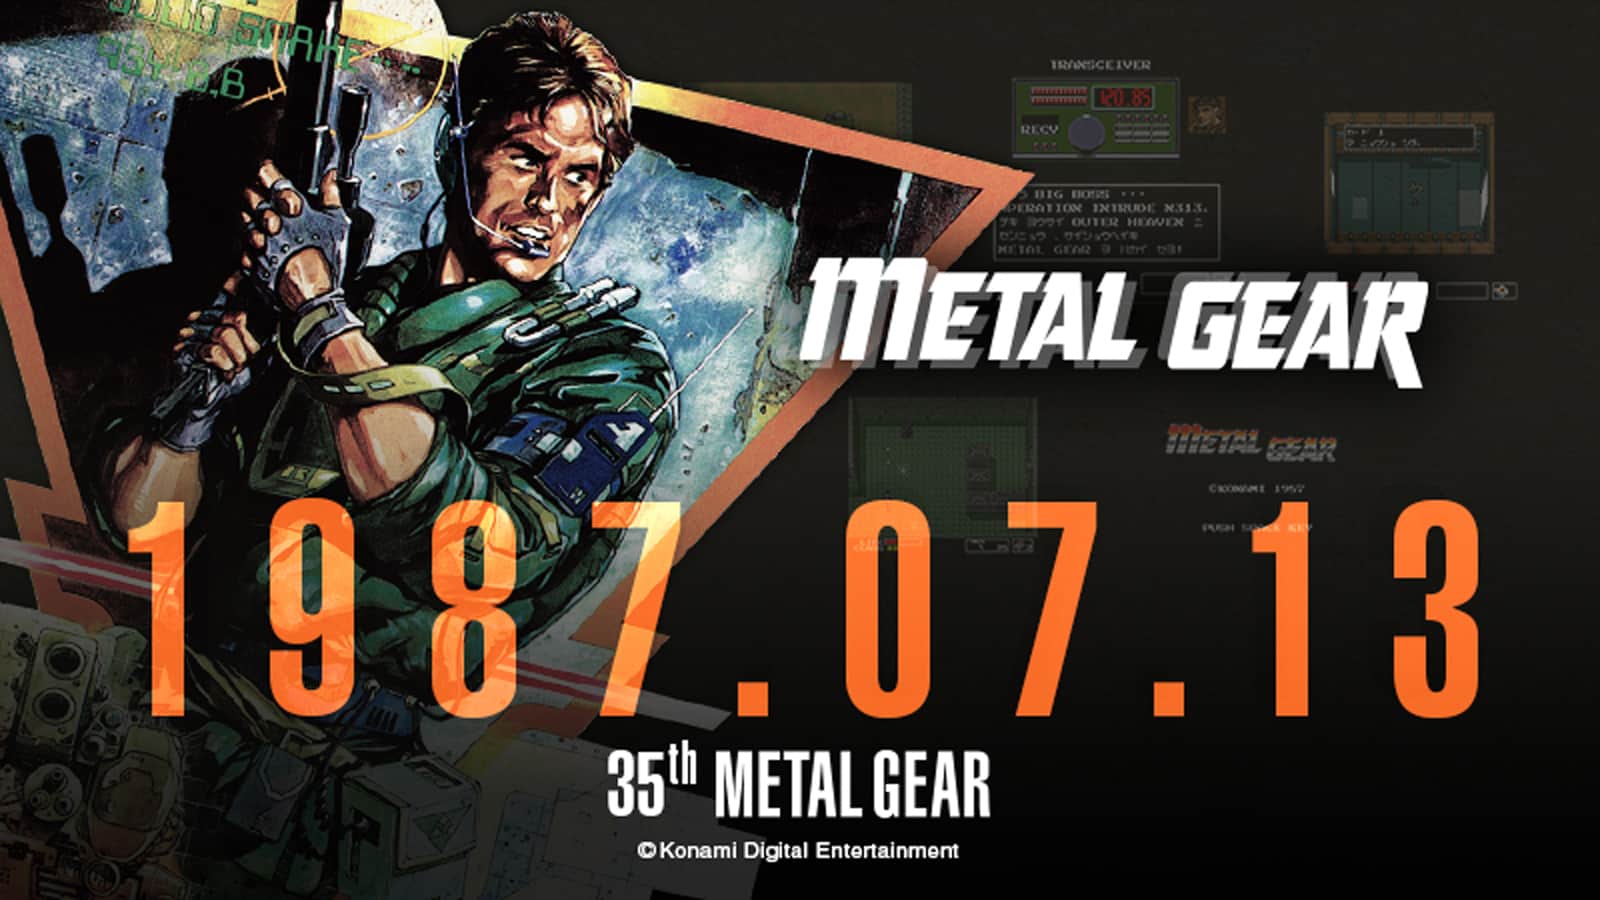 an image of Metal Gear 35 year anniversary